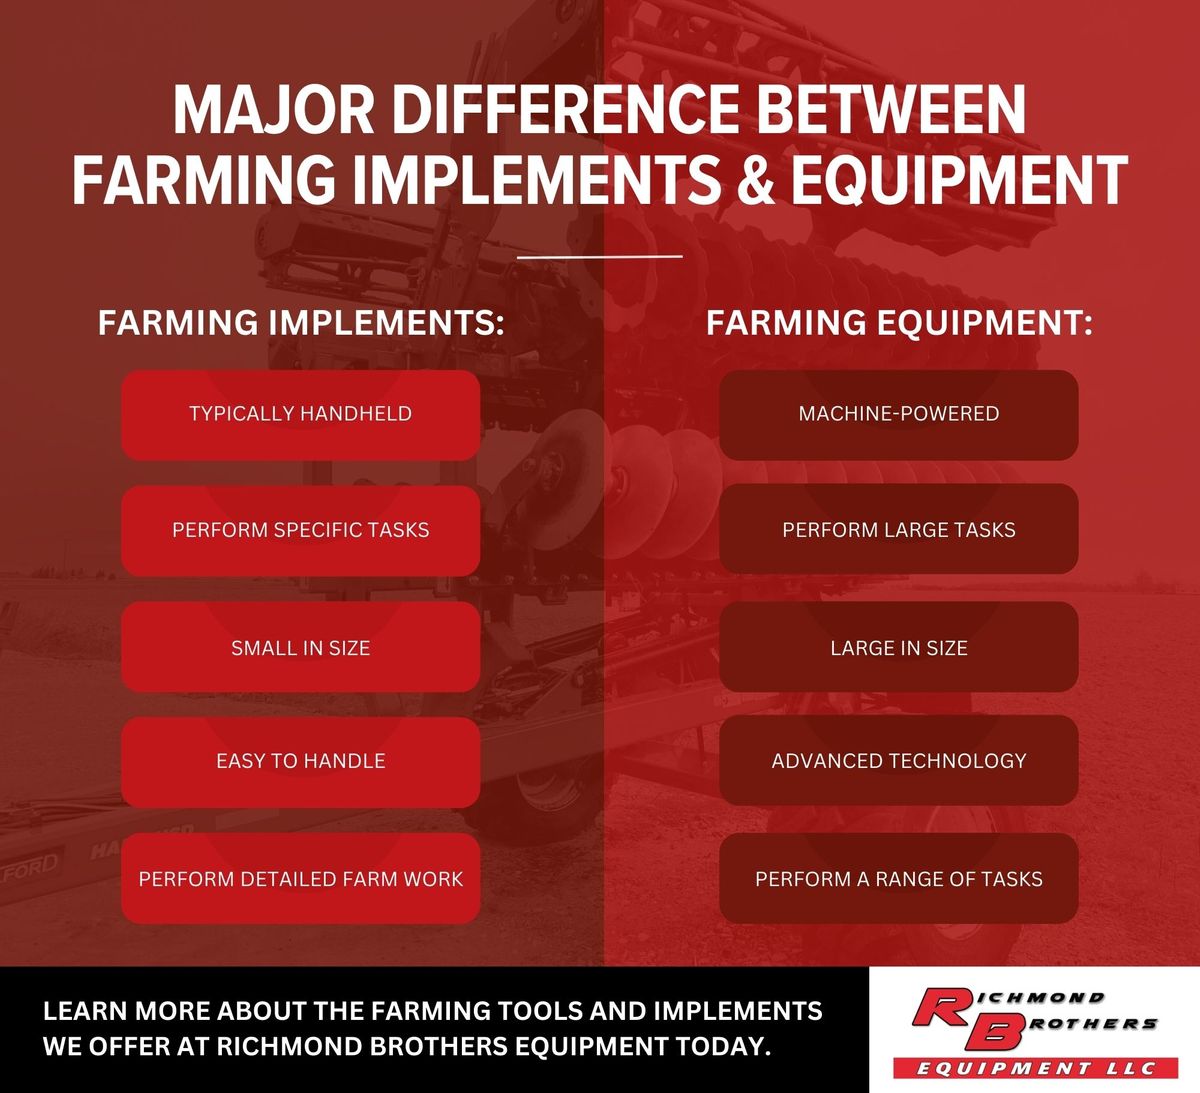 M29842 - Richmond Brothers Equipment Infographic Major Difference Between Farming Implements and Equipment.jpg